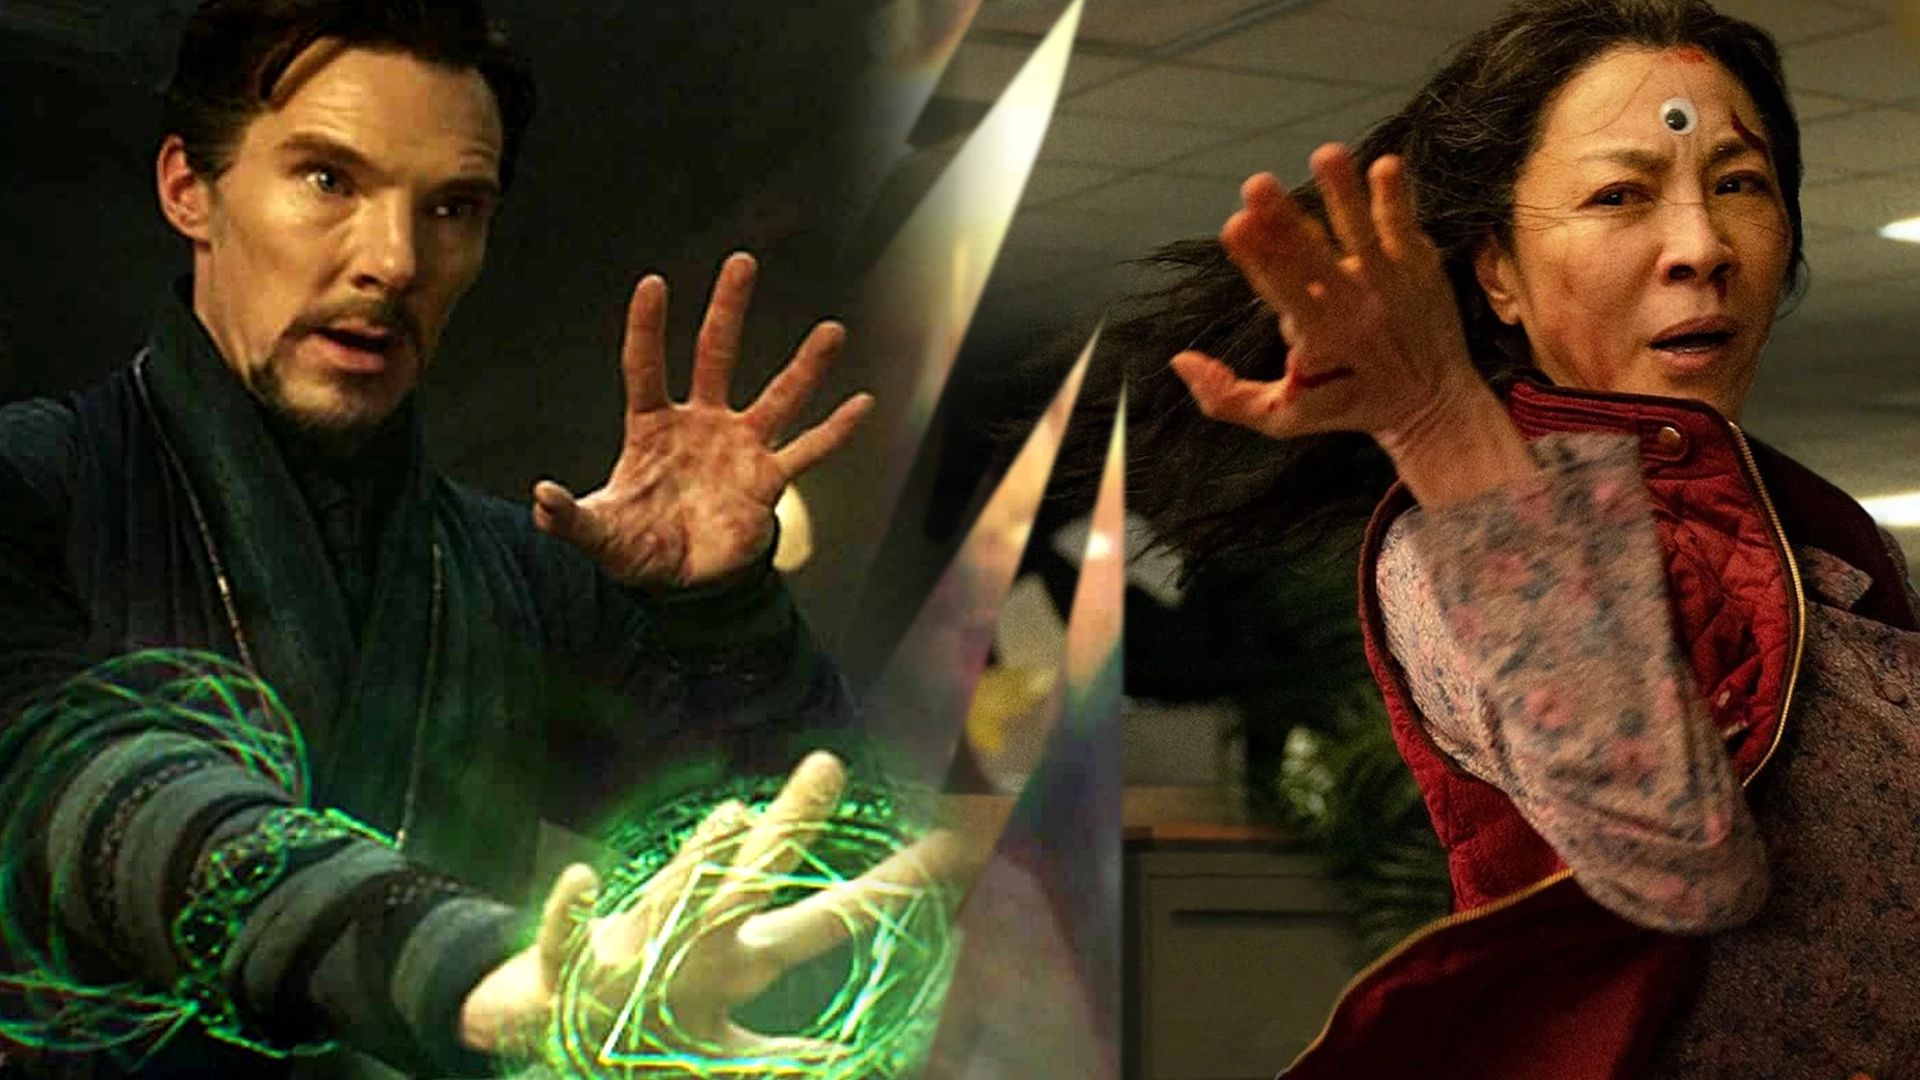 Collage of Dr. Strange and Evelyn from Everything Everywhere All at Once